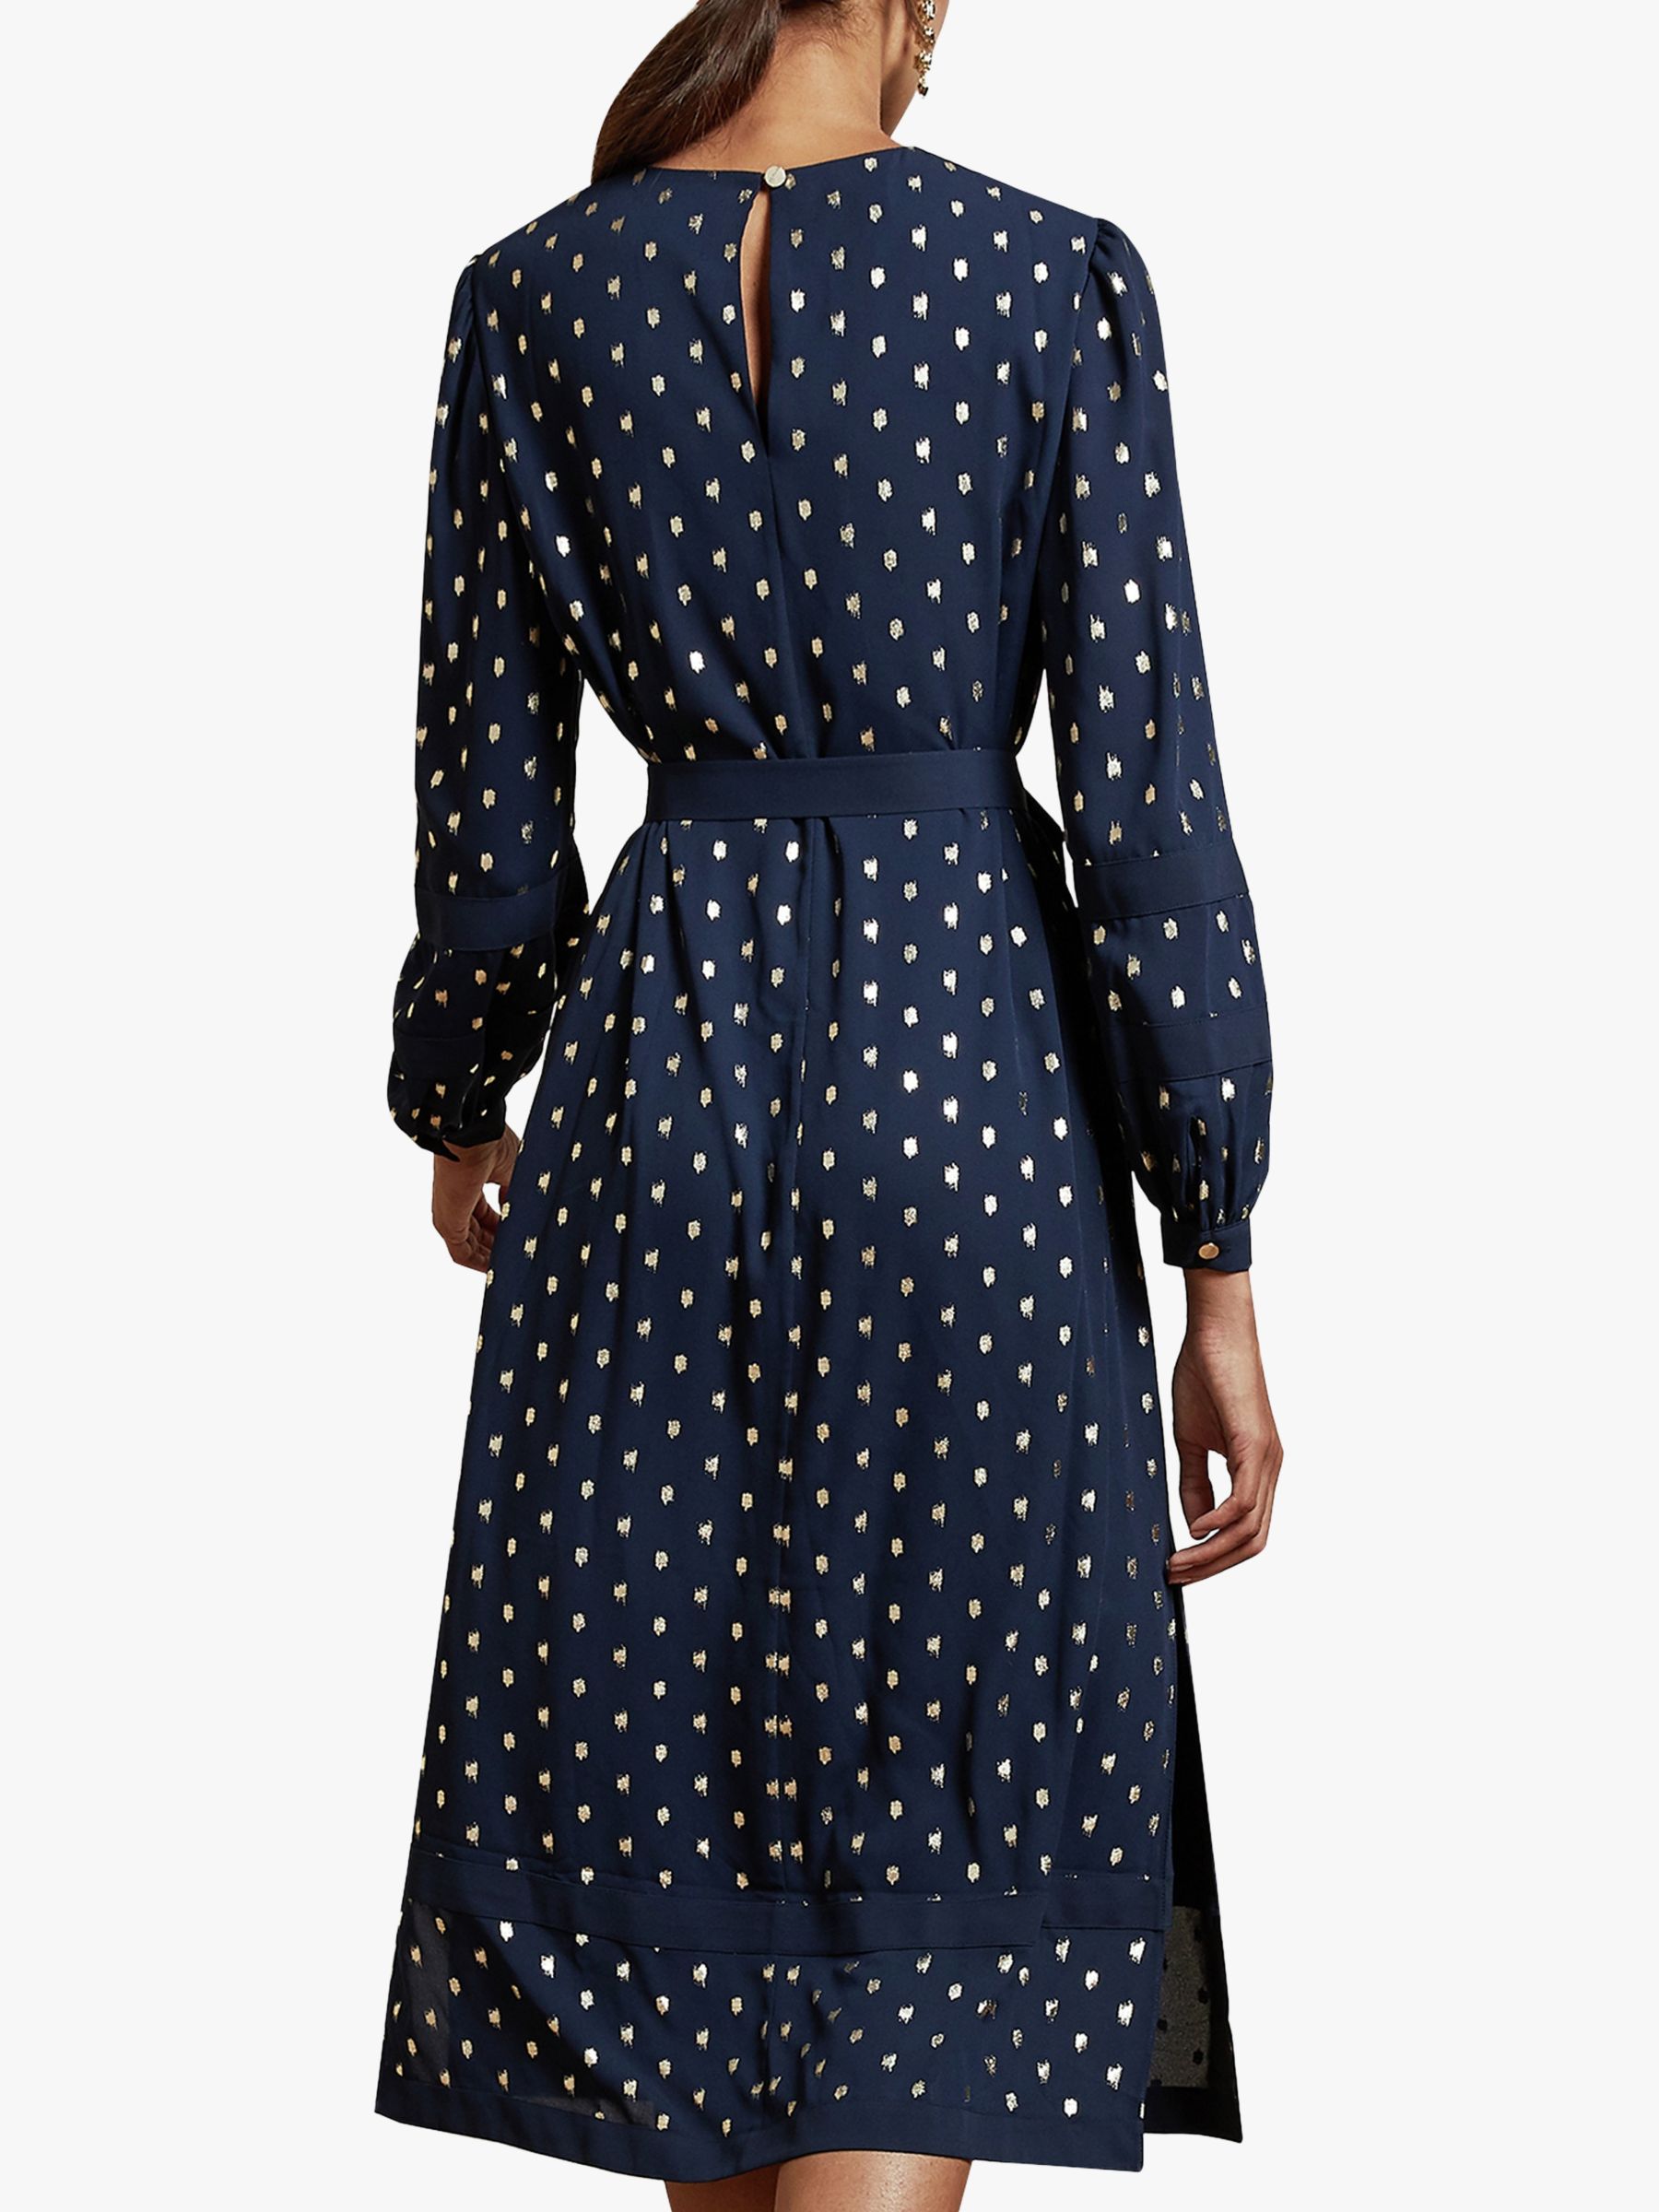 ted baker navy and gold dress